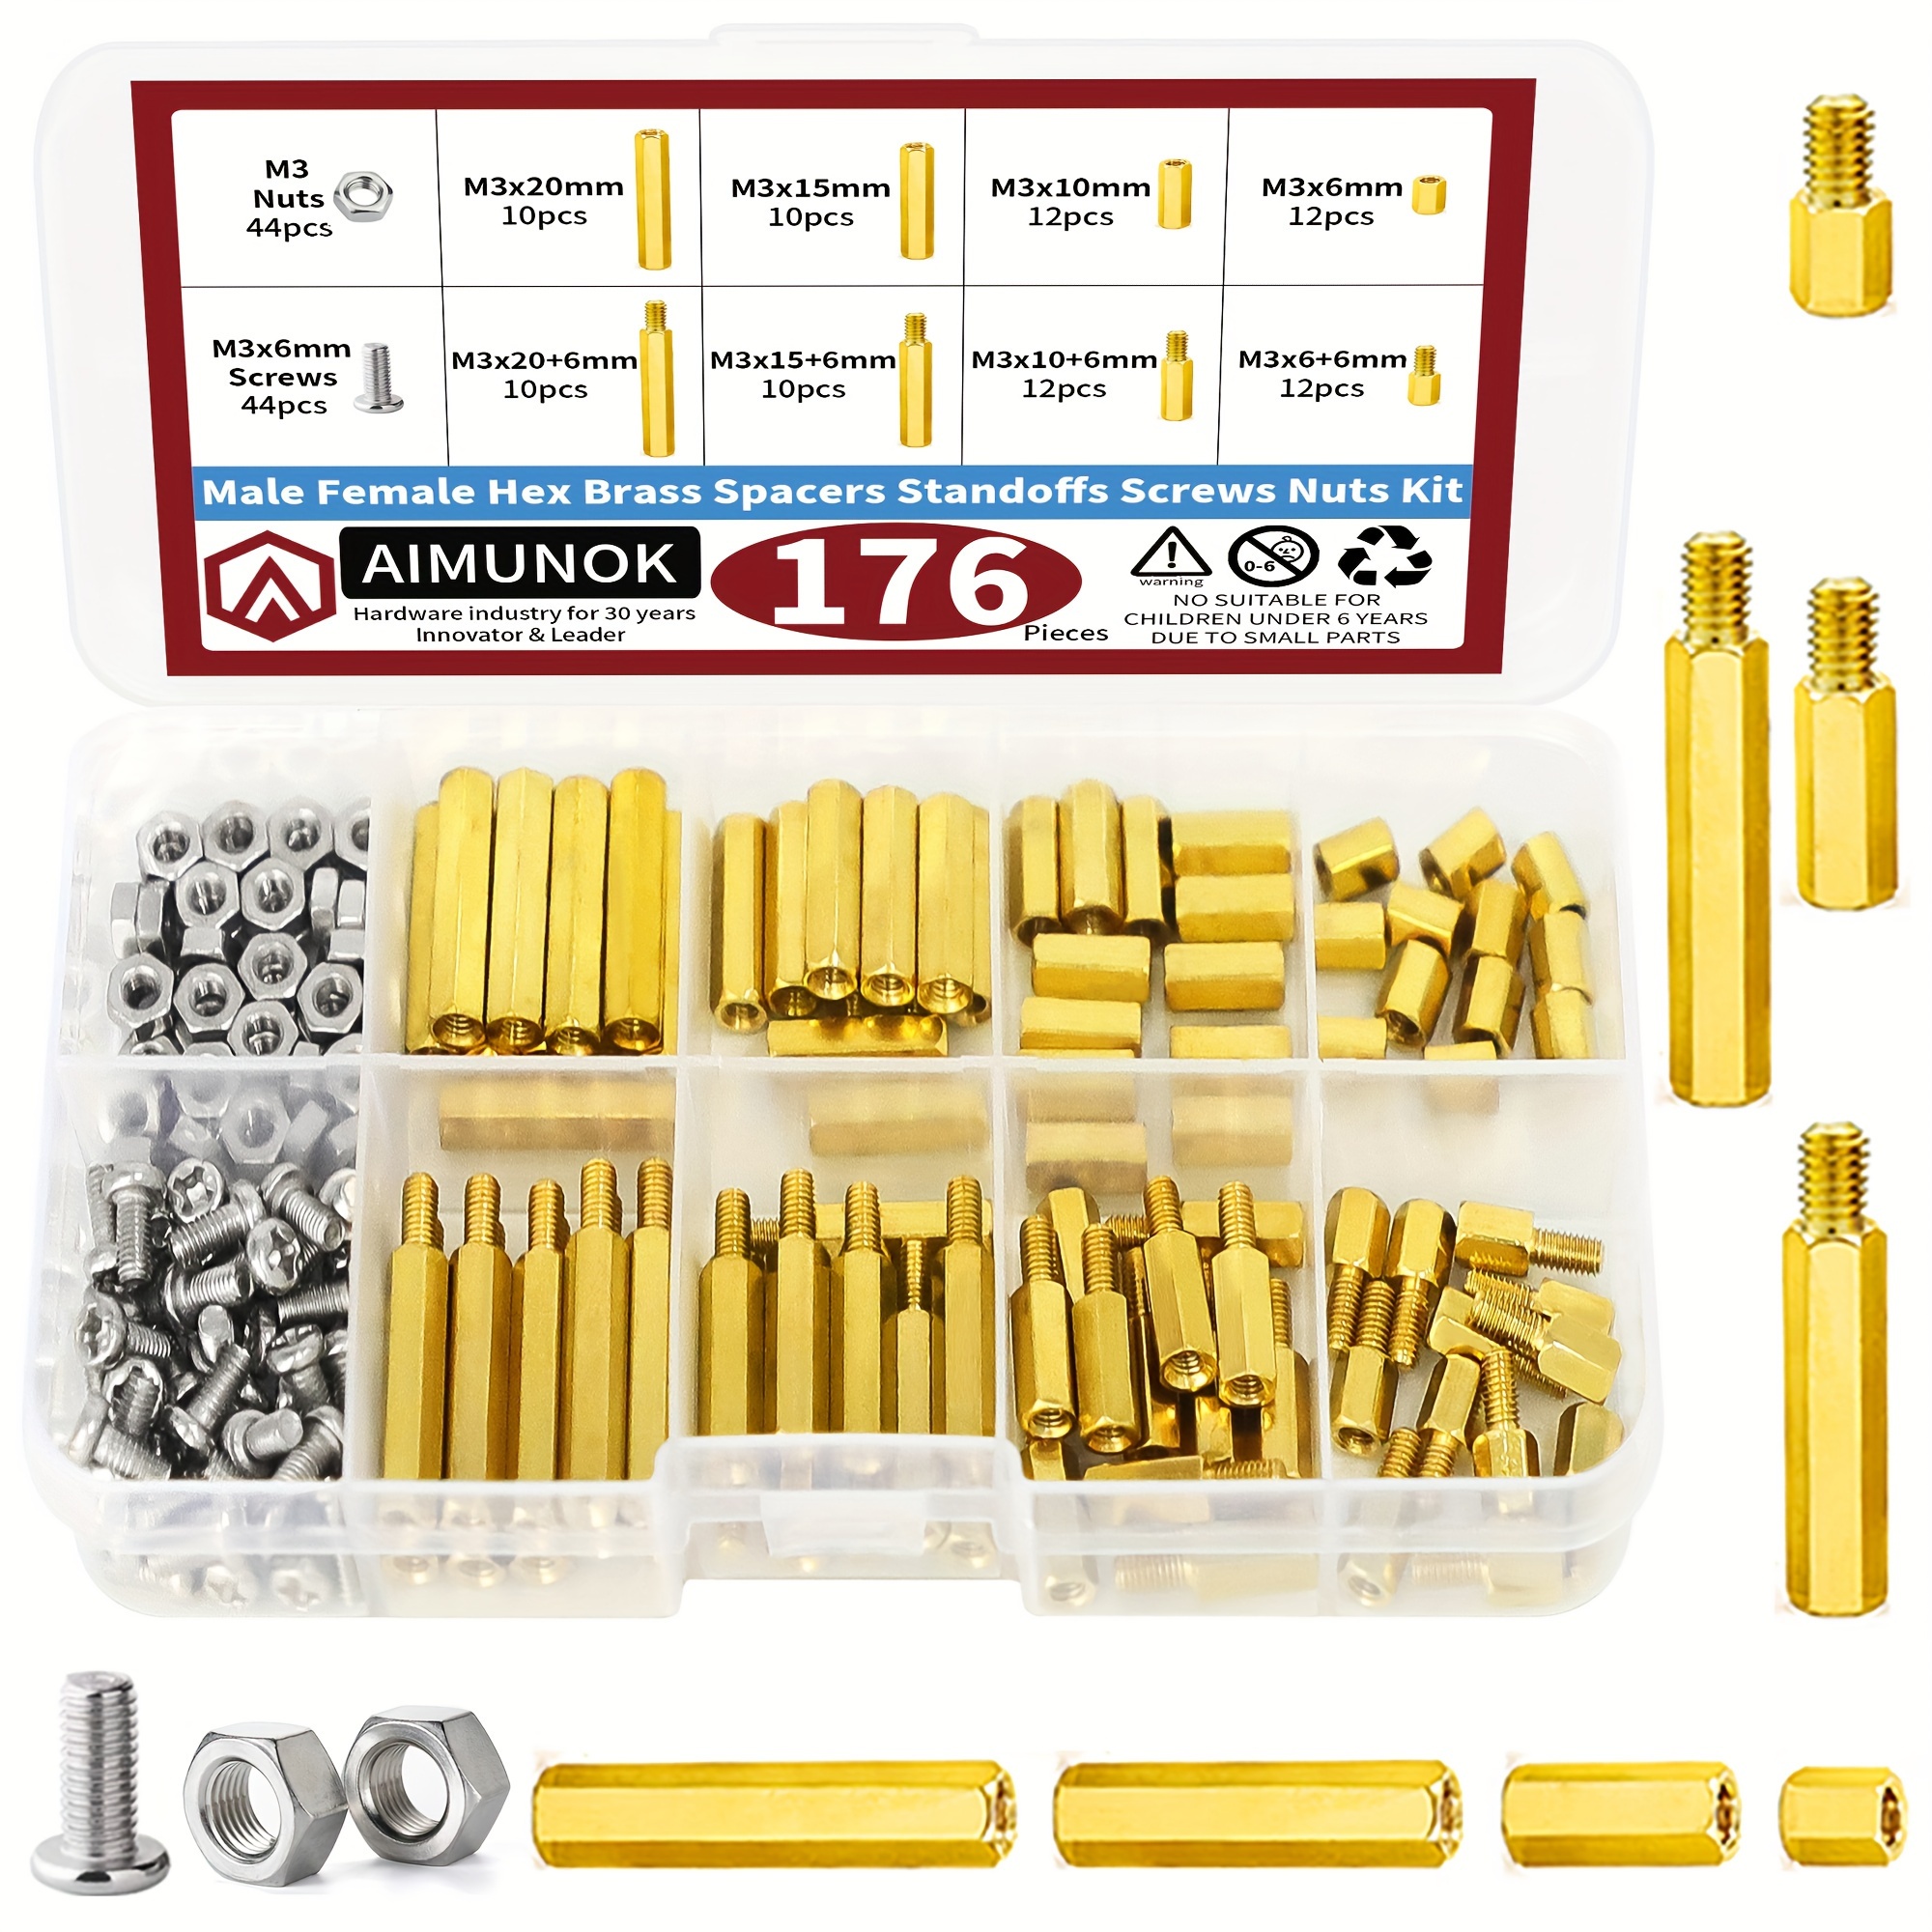 

176pcs M3 Motherboard Standoffs&screws&nuts Kit, Hex Male-female Brass Spacer Standoffs, Laptop Screws For Diy Computer Build, Electronic Projects, Raspberry Pi, Circuit Board Etc